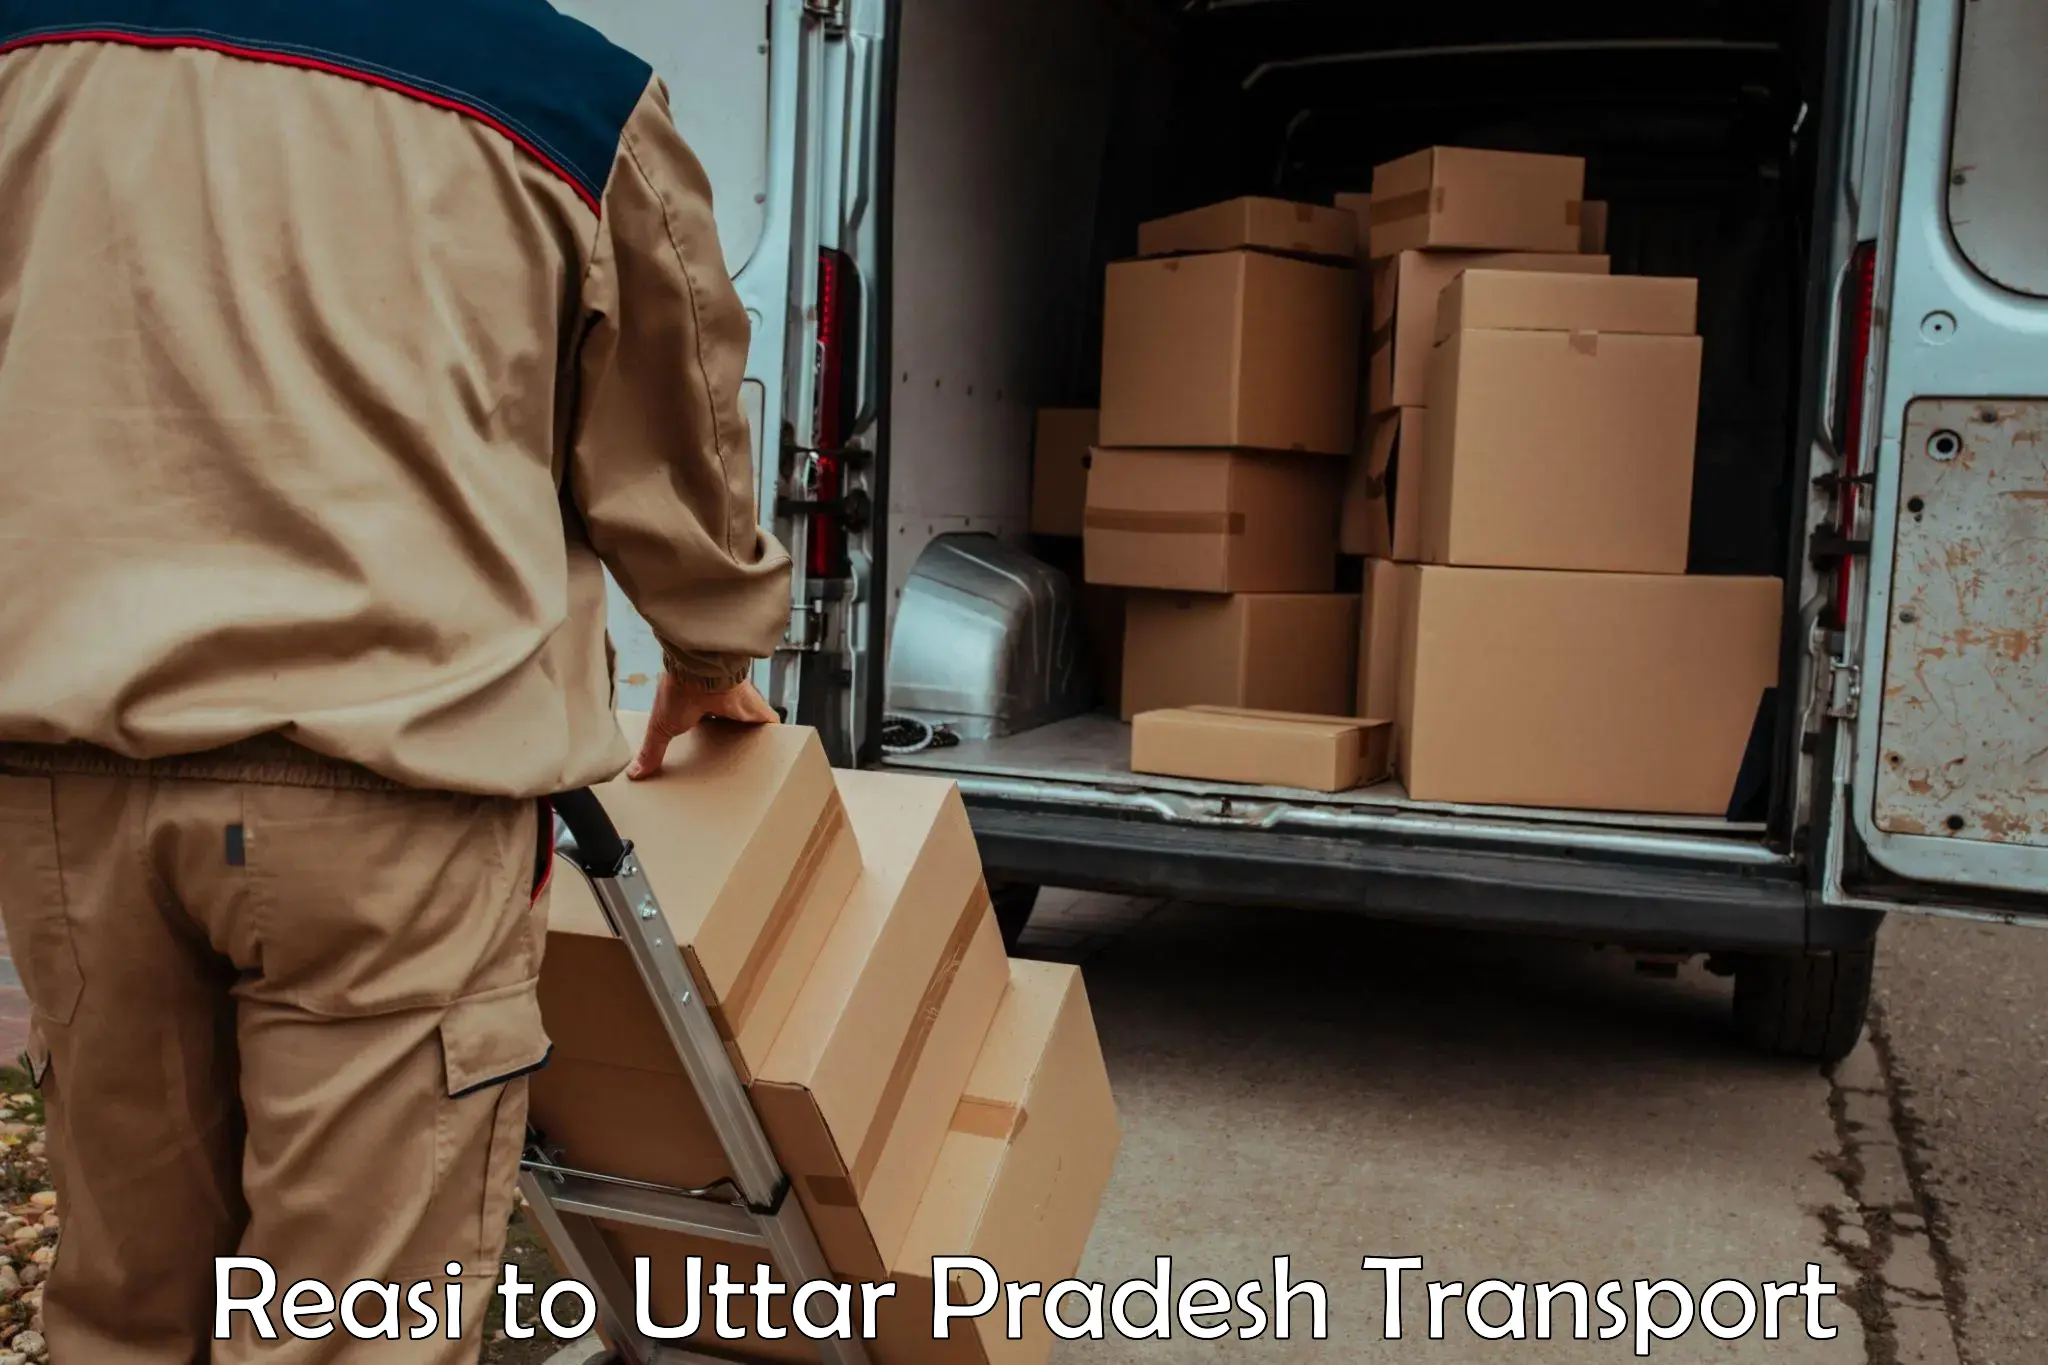 Domestic goods transportation services Reasi to Najibabad